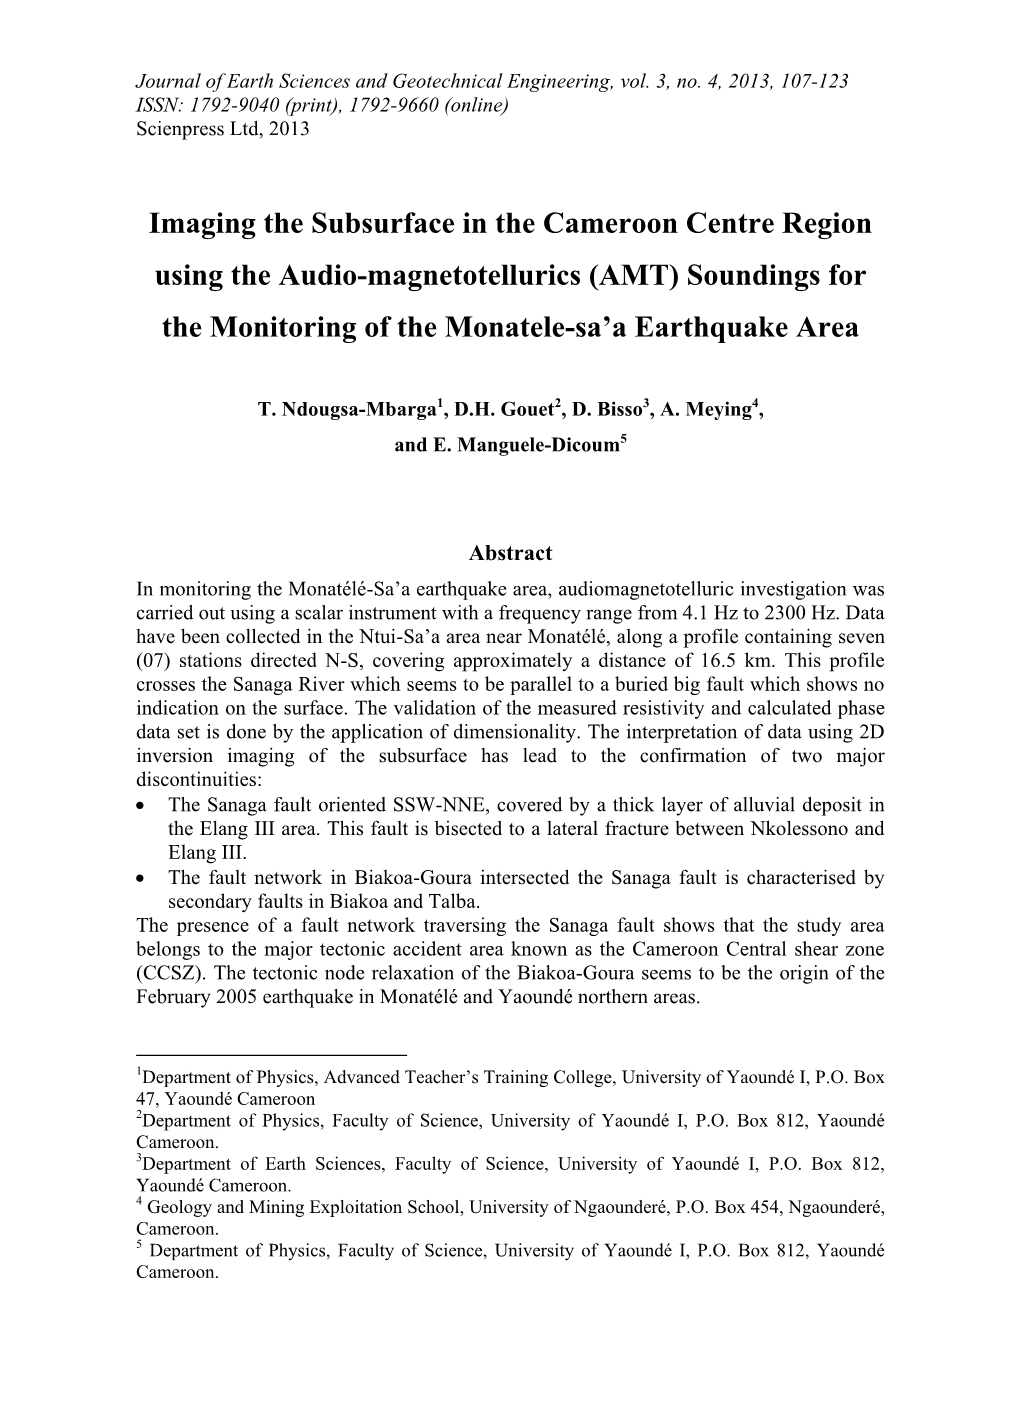 Imaging the Subsurface in the Cameroon Centre Region Using the Audio-Magnetotellurics (AMT) Soundings for the Monitoring of the Monatele-Sa’A Earthquake Area